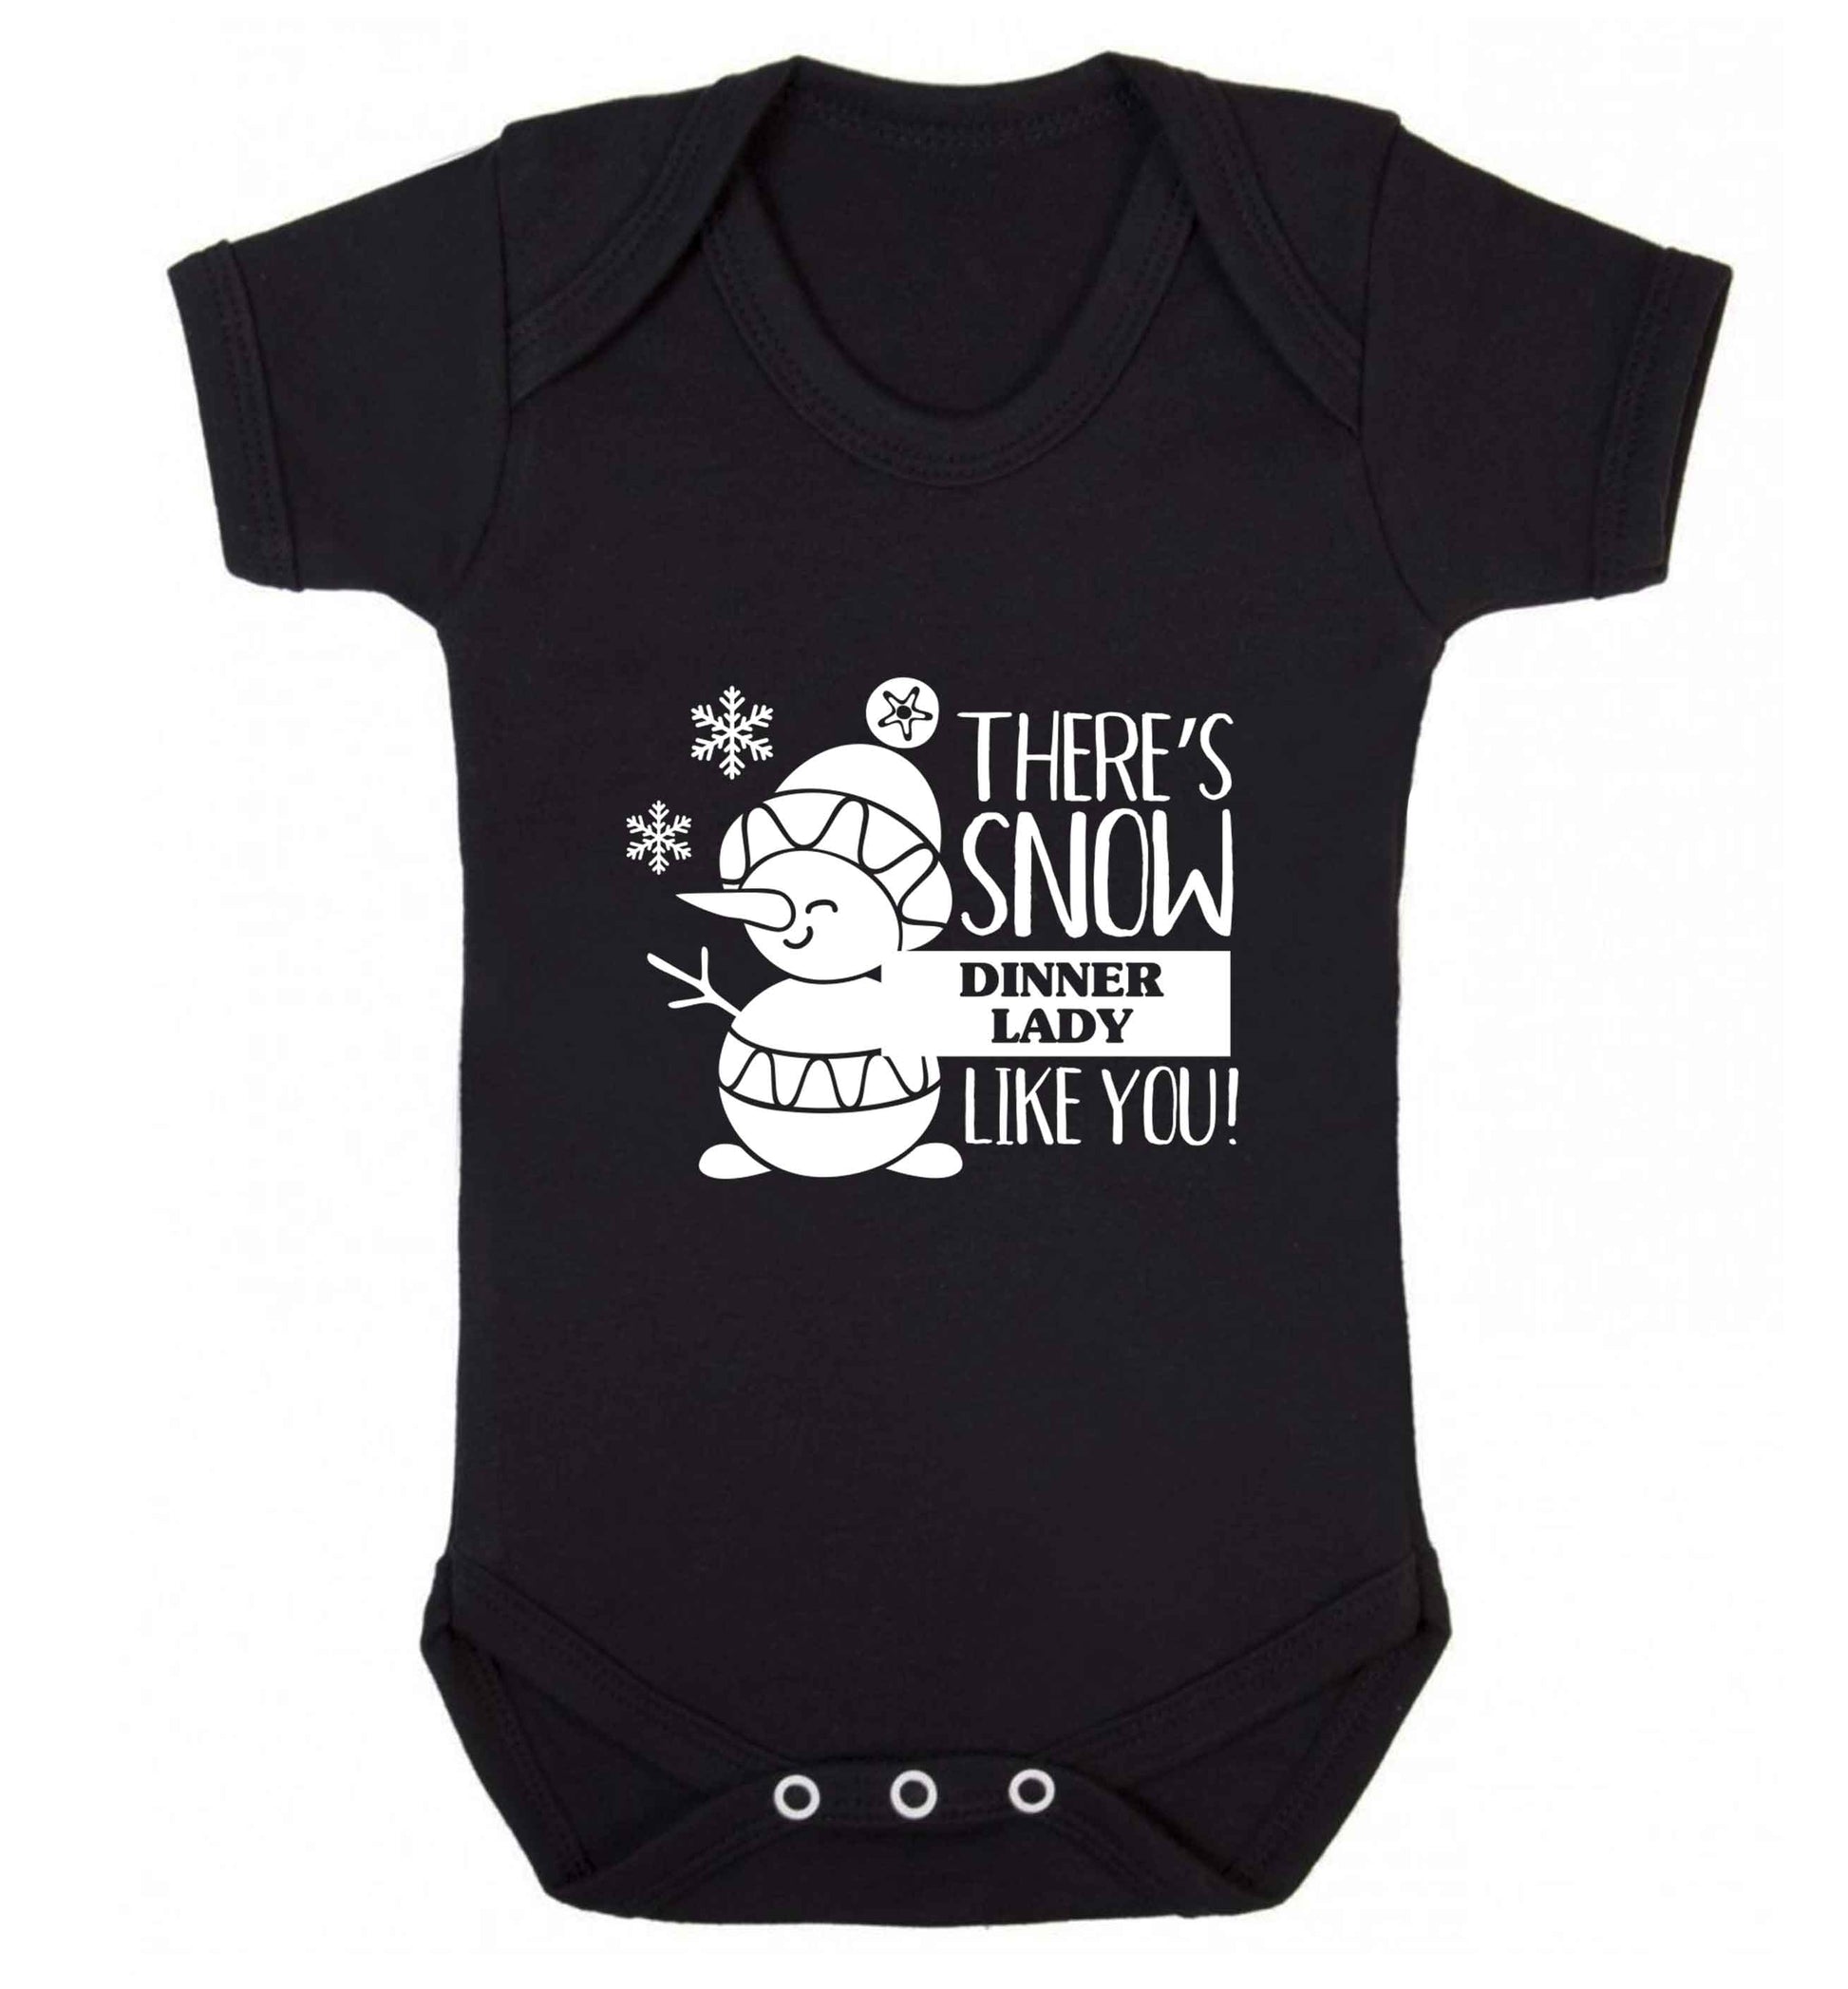 There's snow dinner lady like you baby vest black 18-24 months